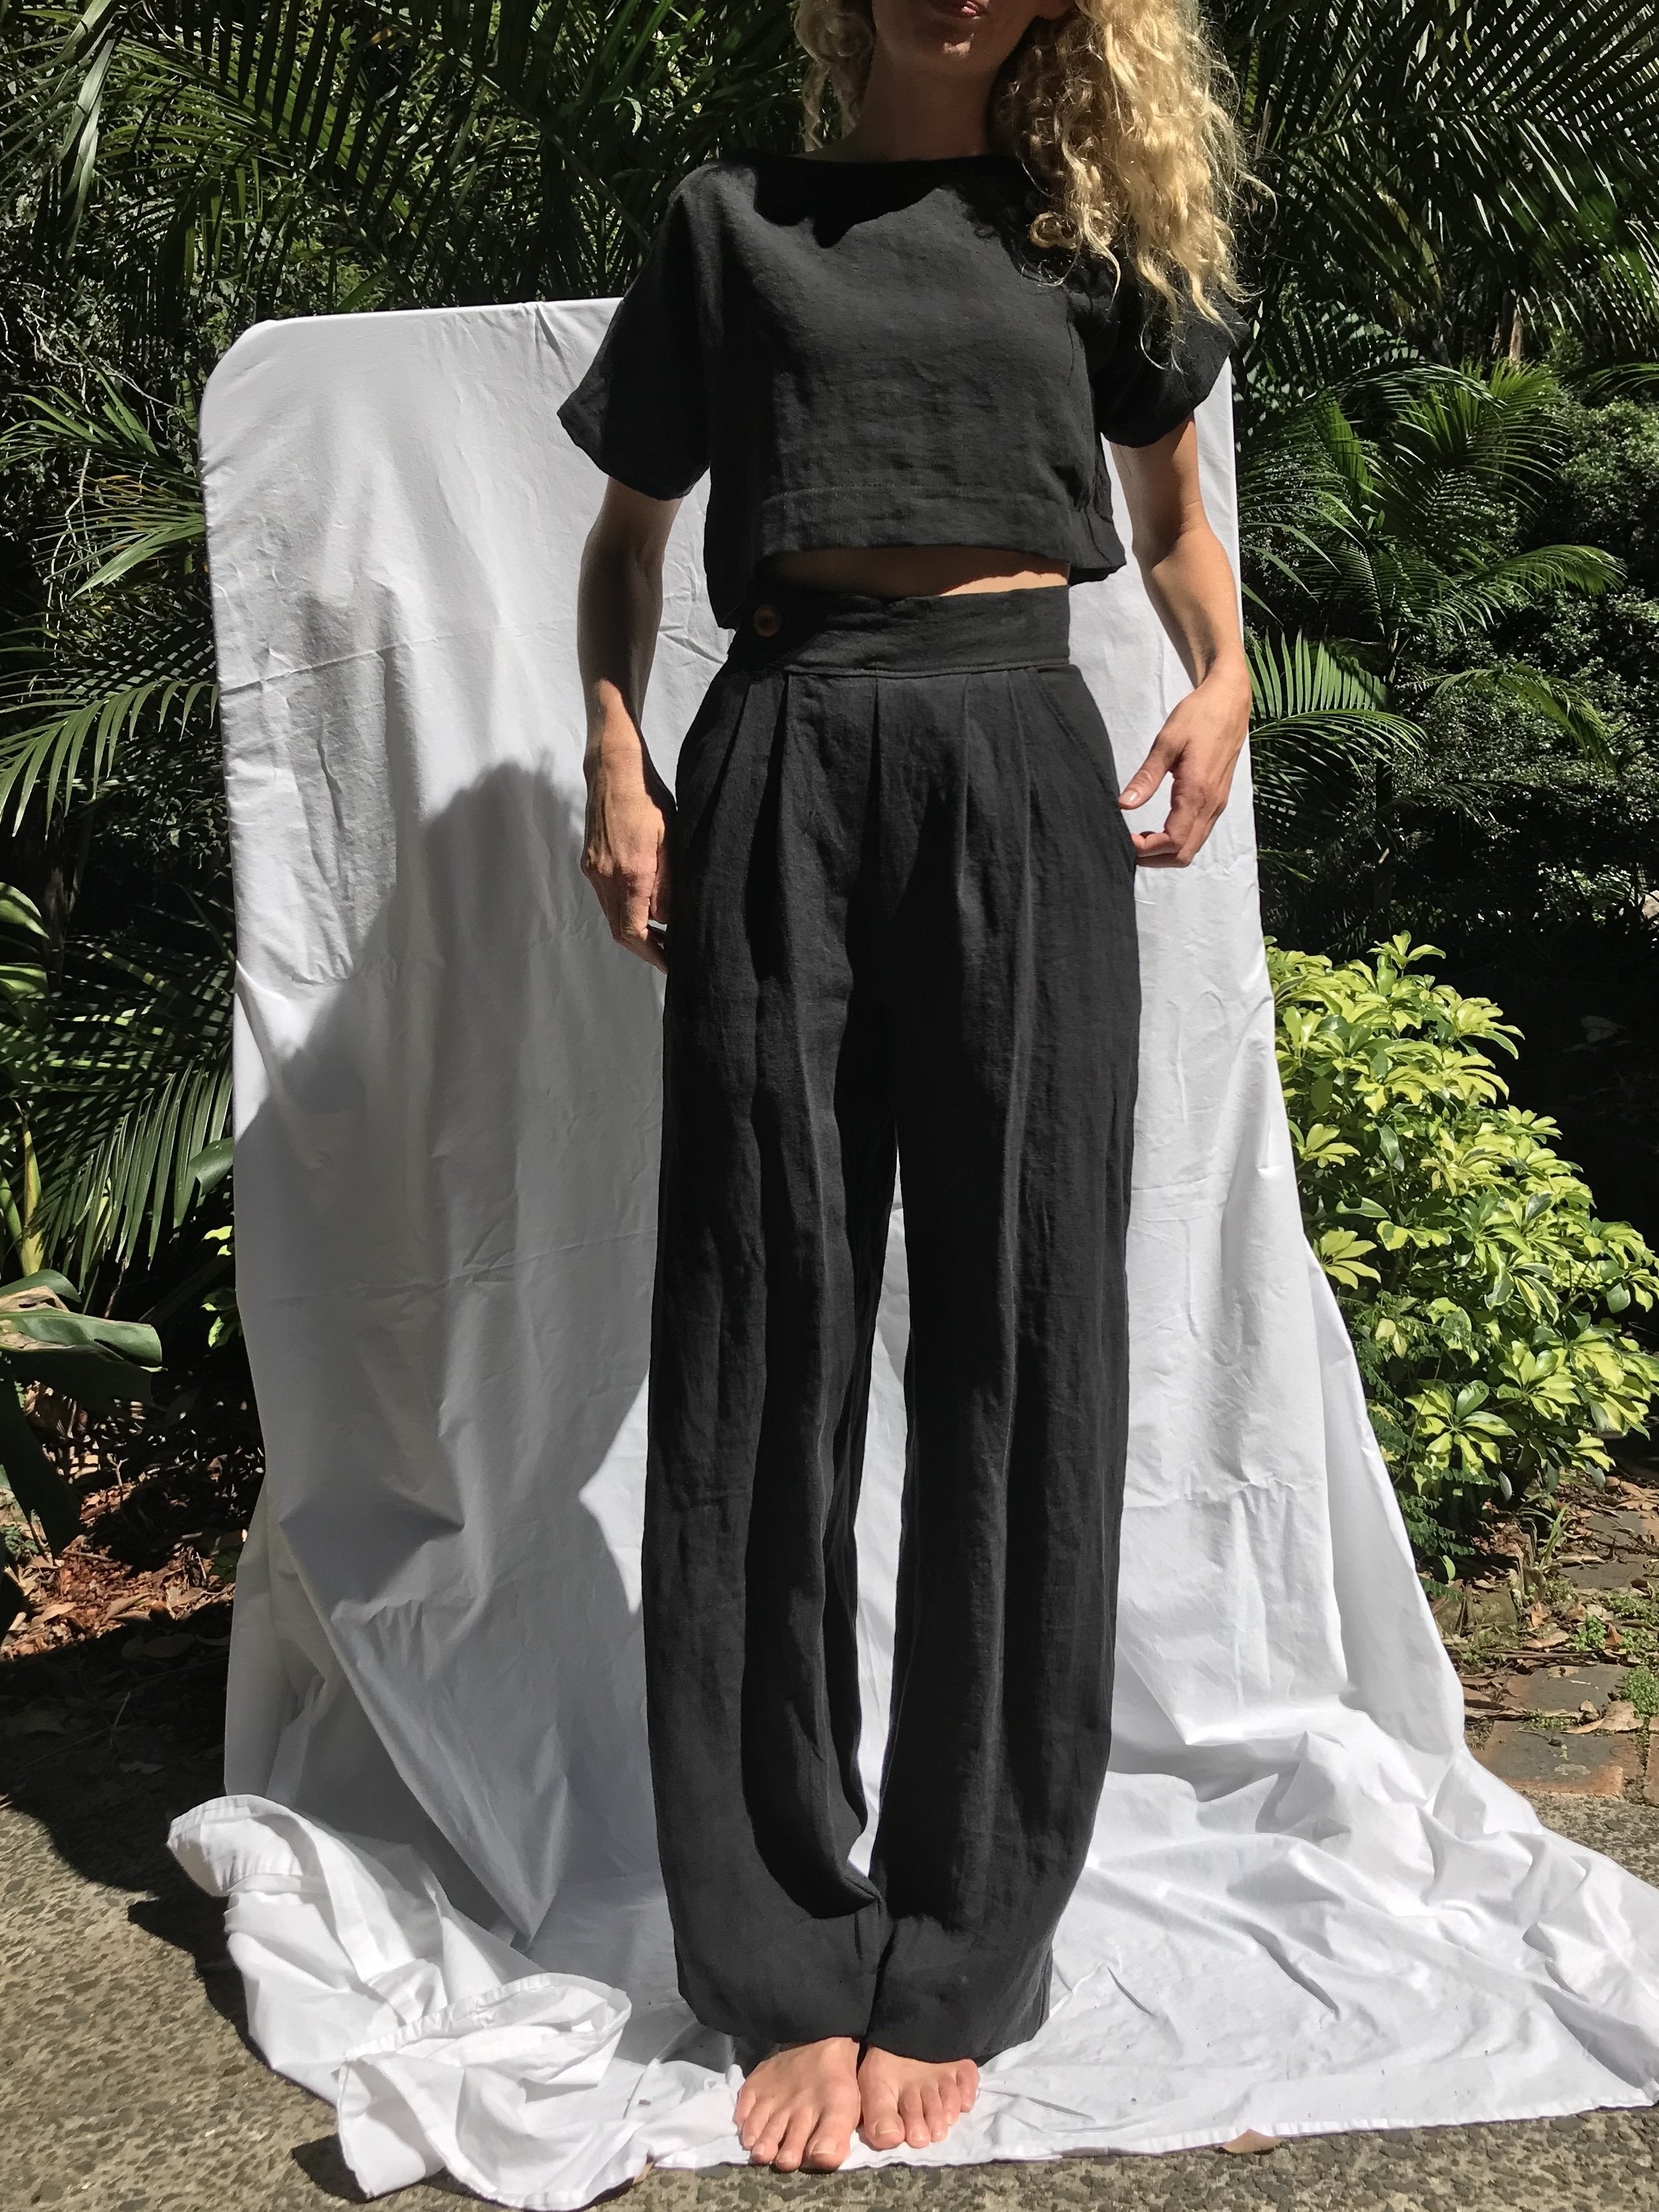 https://cdn.shopify.com/s/files/1/0359/7133/4282/files/Slow_fashion_linen_high_waisted_pants_straight_leg_pants_wide_leg_trousers_tailored_fit_and_high_waisted_women_s_pants._Handmade_and_designed_in_Australia_sustainable_and_fair._Design_7309420d-b531-4f41-8b80-7bf697c97b76.jpg?v=1631591242